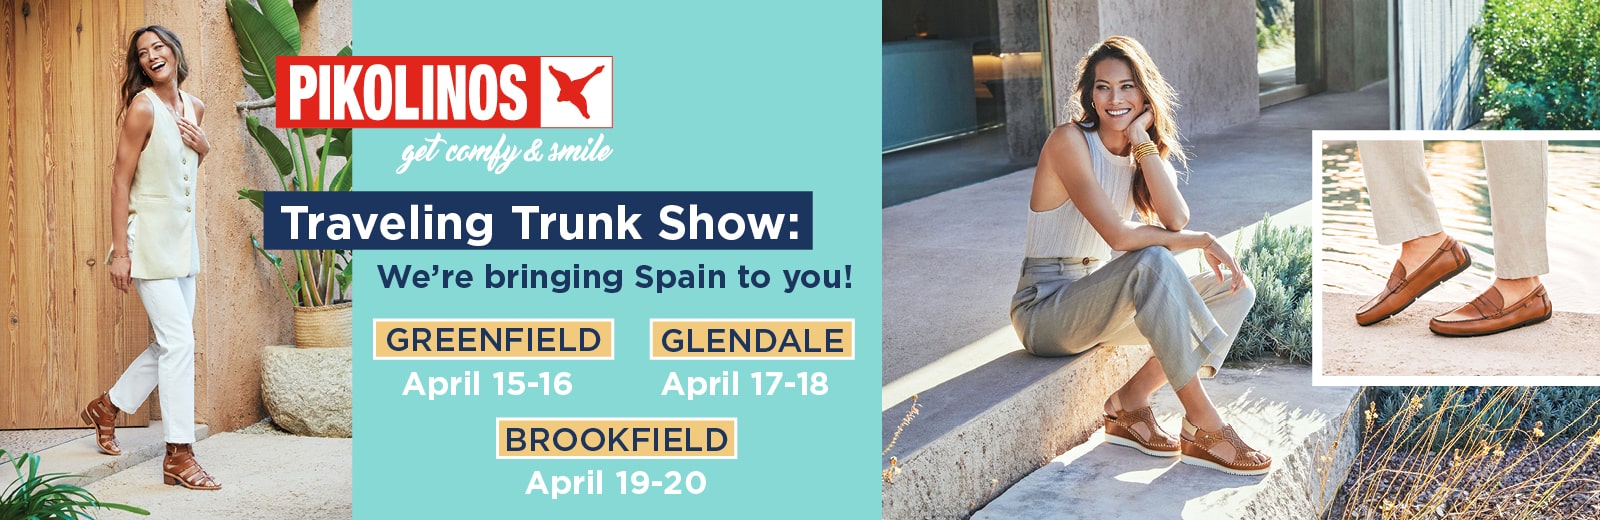 Don't miss our Pikolinos Traveling Trunk Show - where you will find the largest selection of Pikolinos! April 15th - 20th at designated stores. Call for more information!